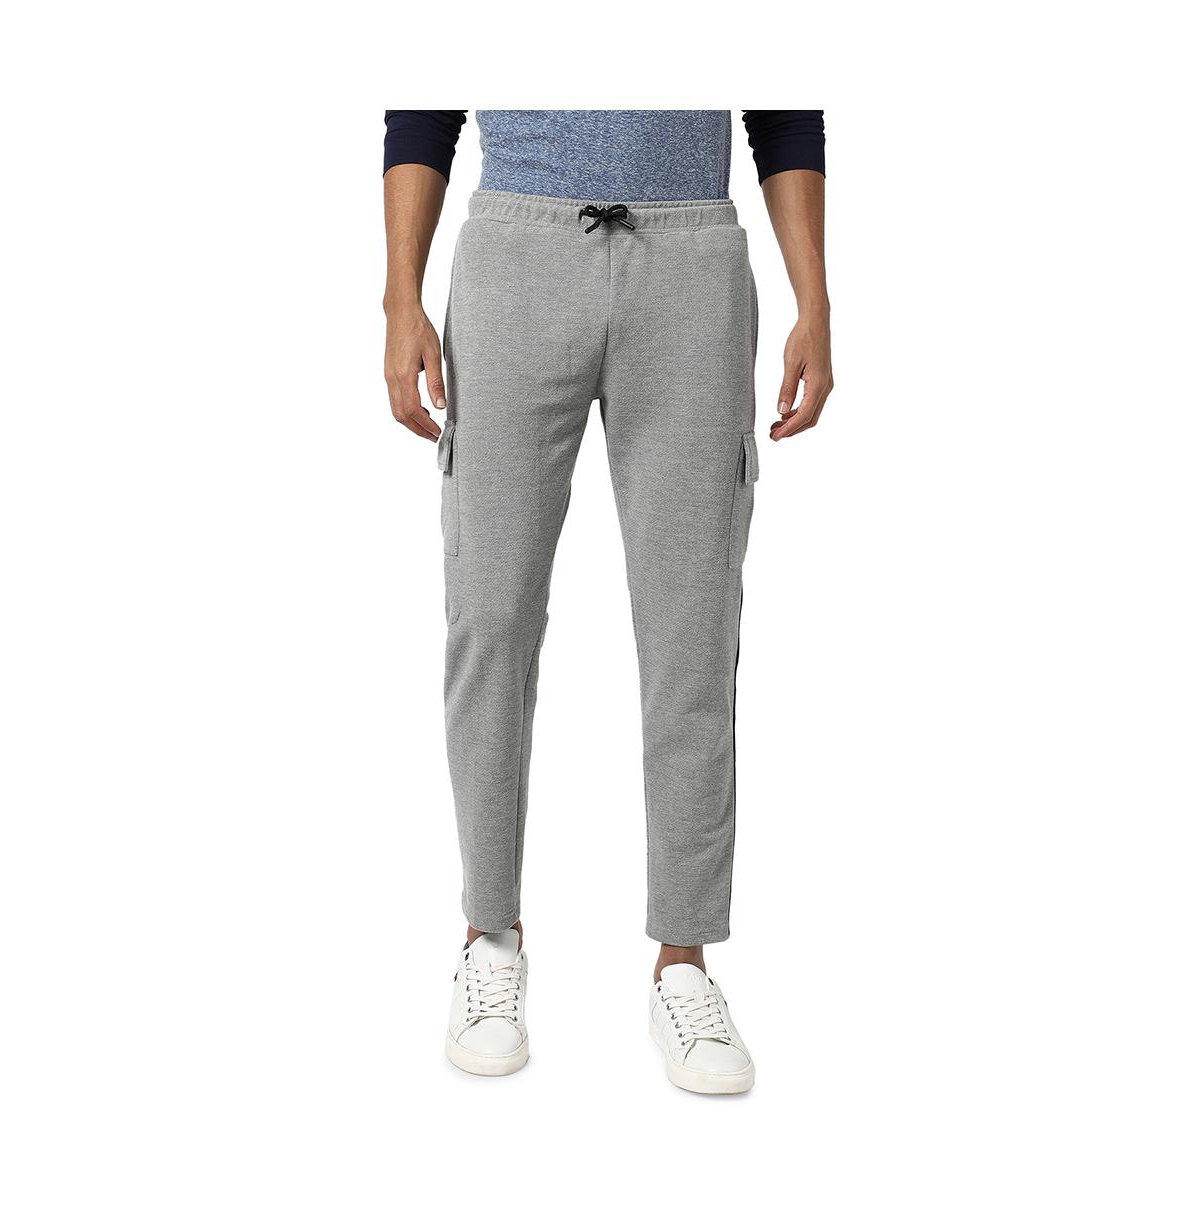 Campus Sutra Men's Light Grey Side Casual Joggers